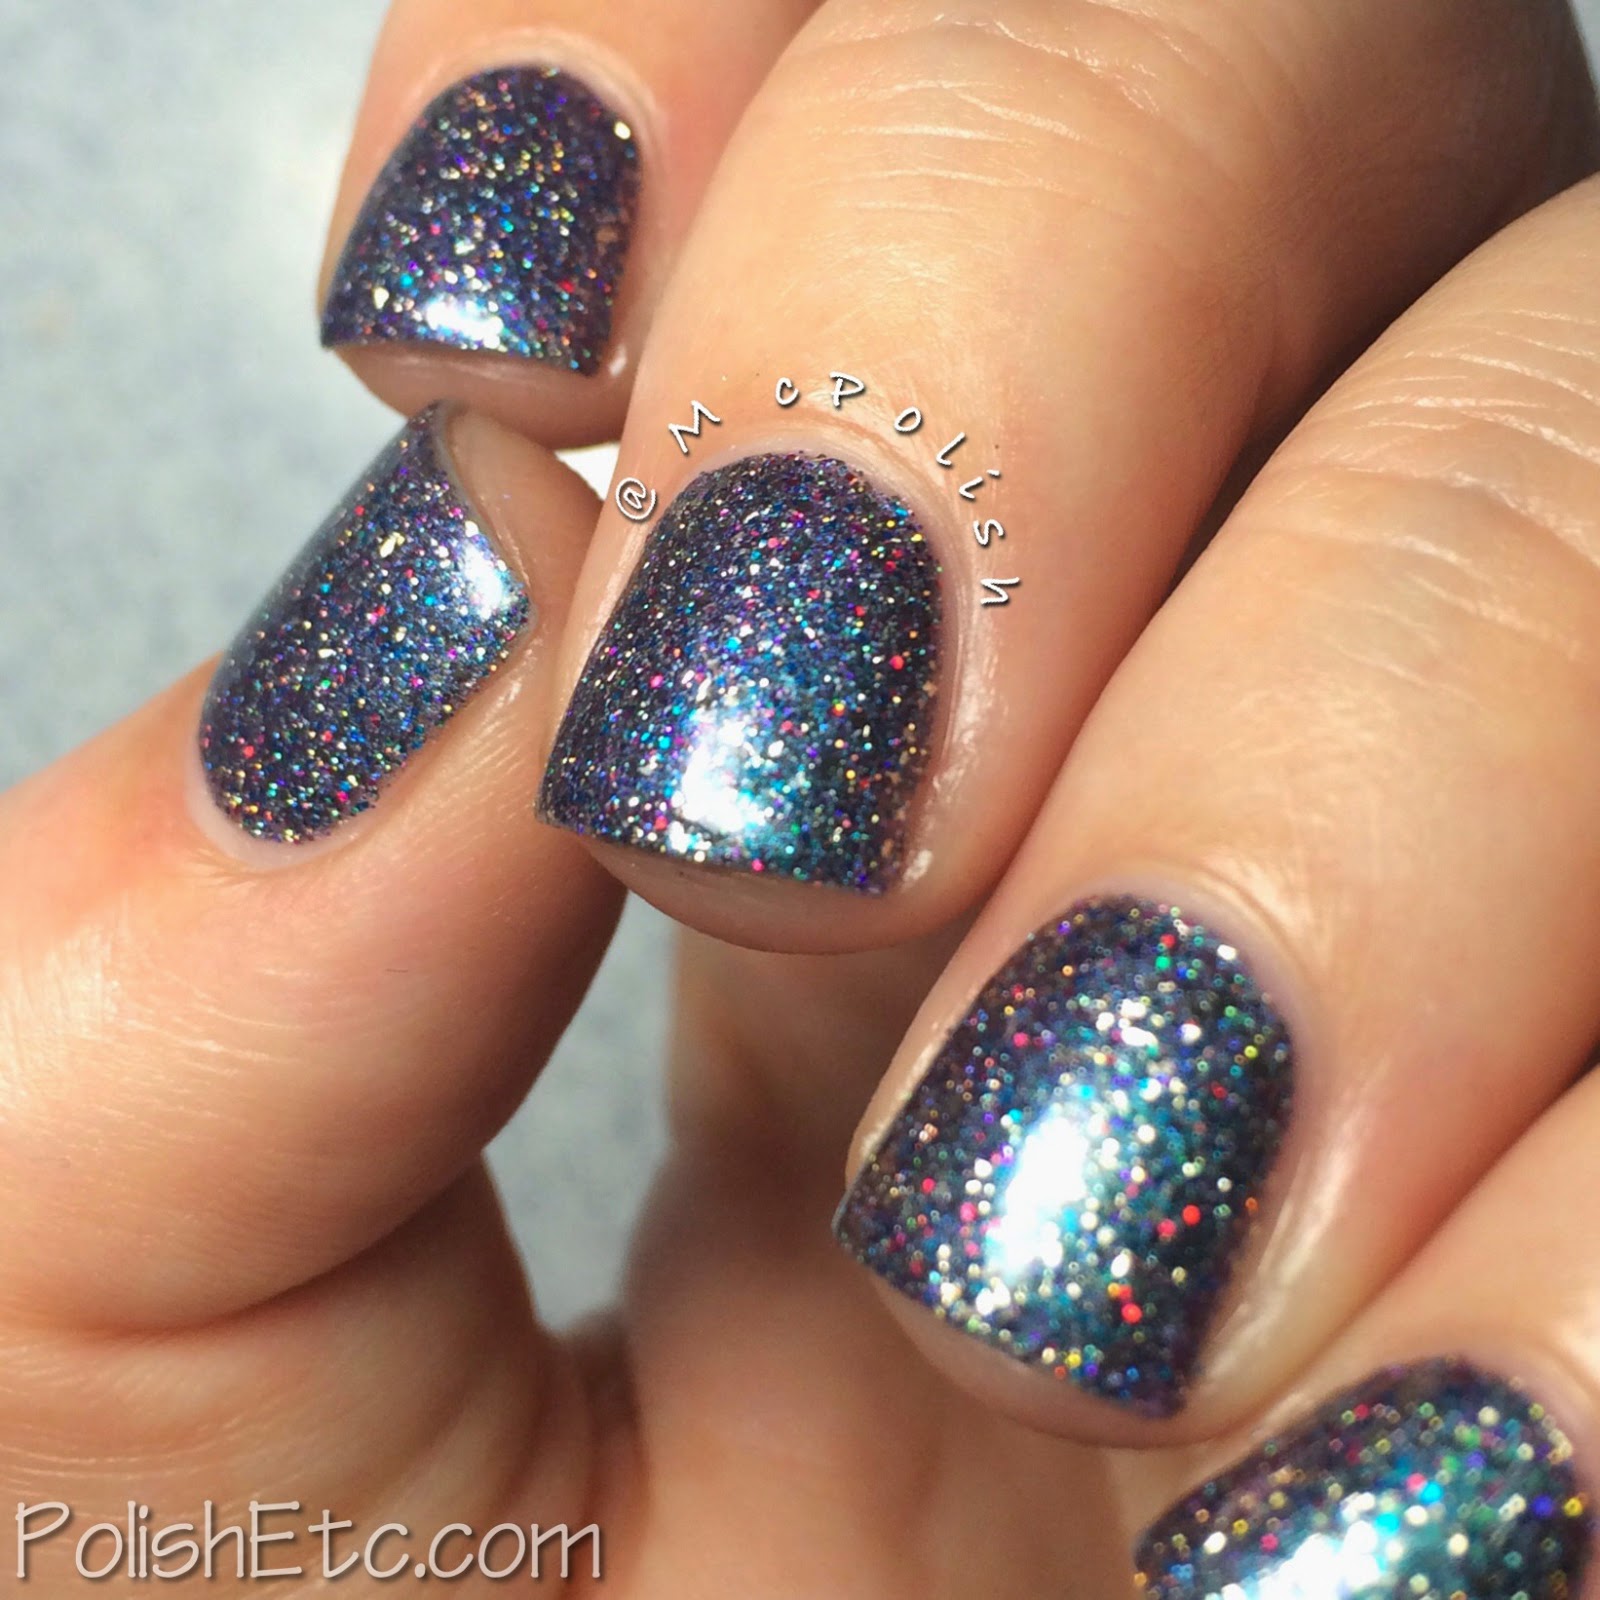 Digital Nails - So Sparkle (swatched by McPolish)